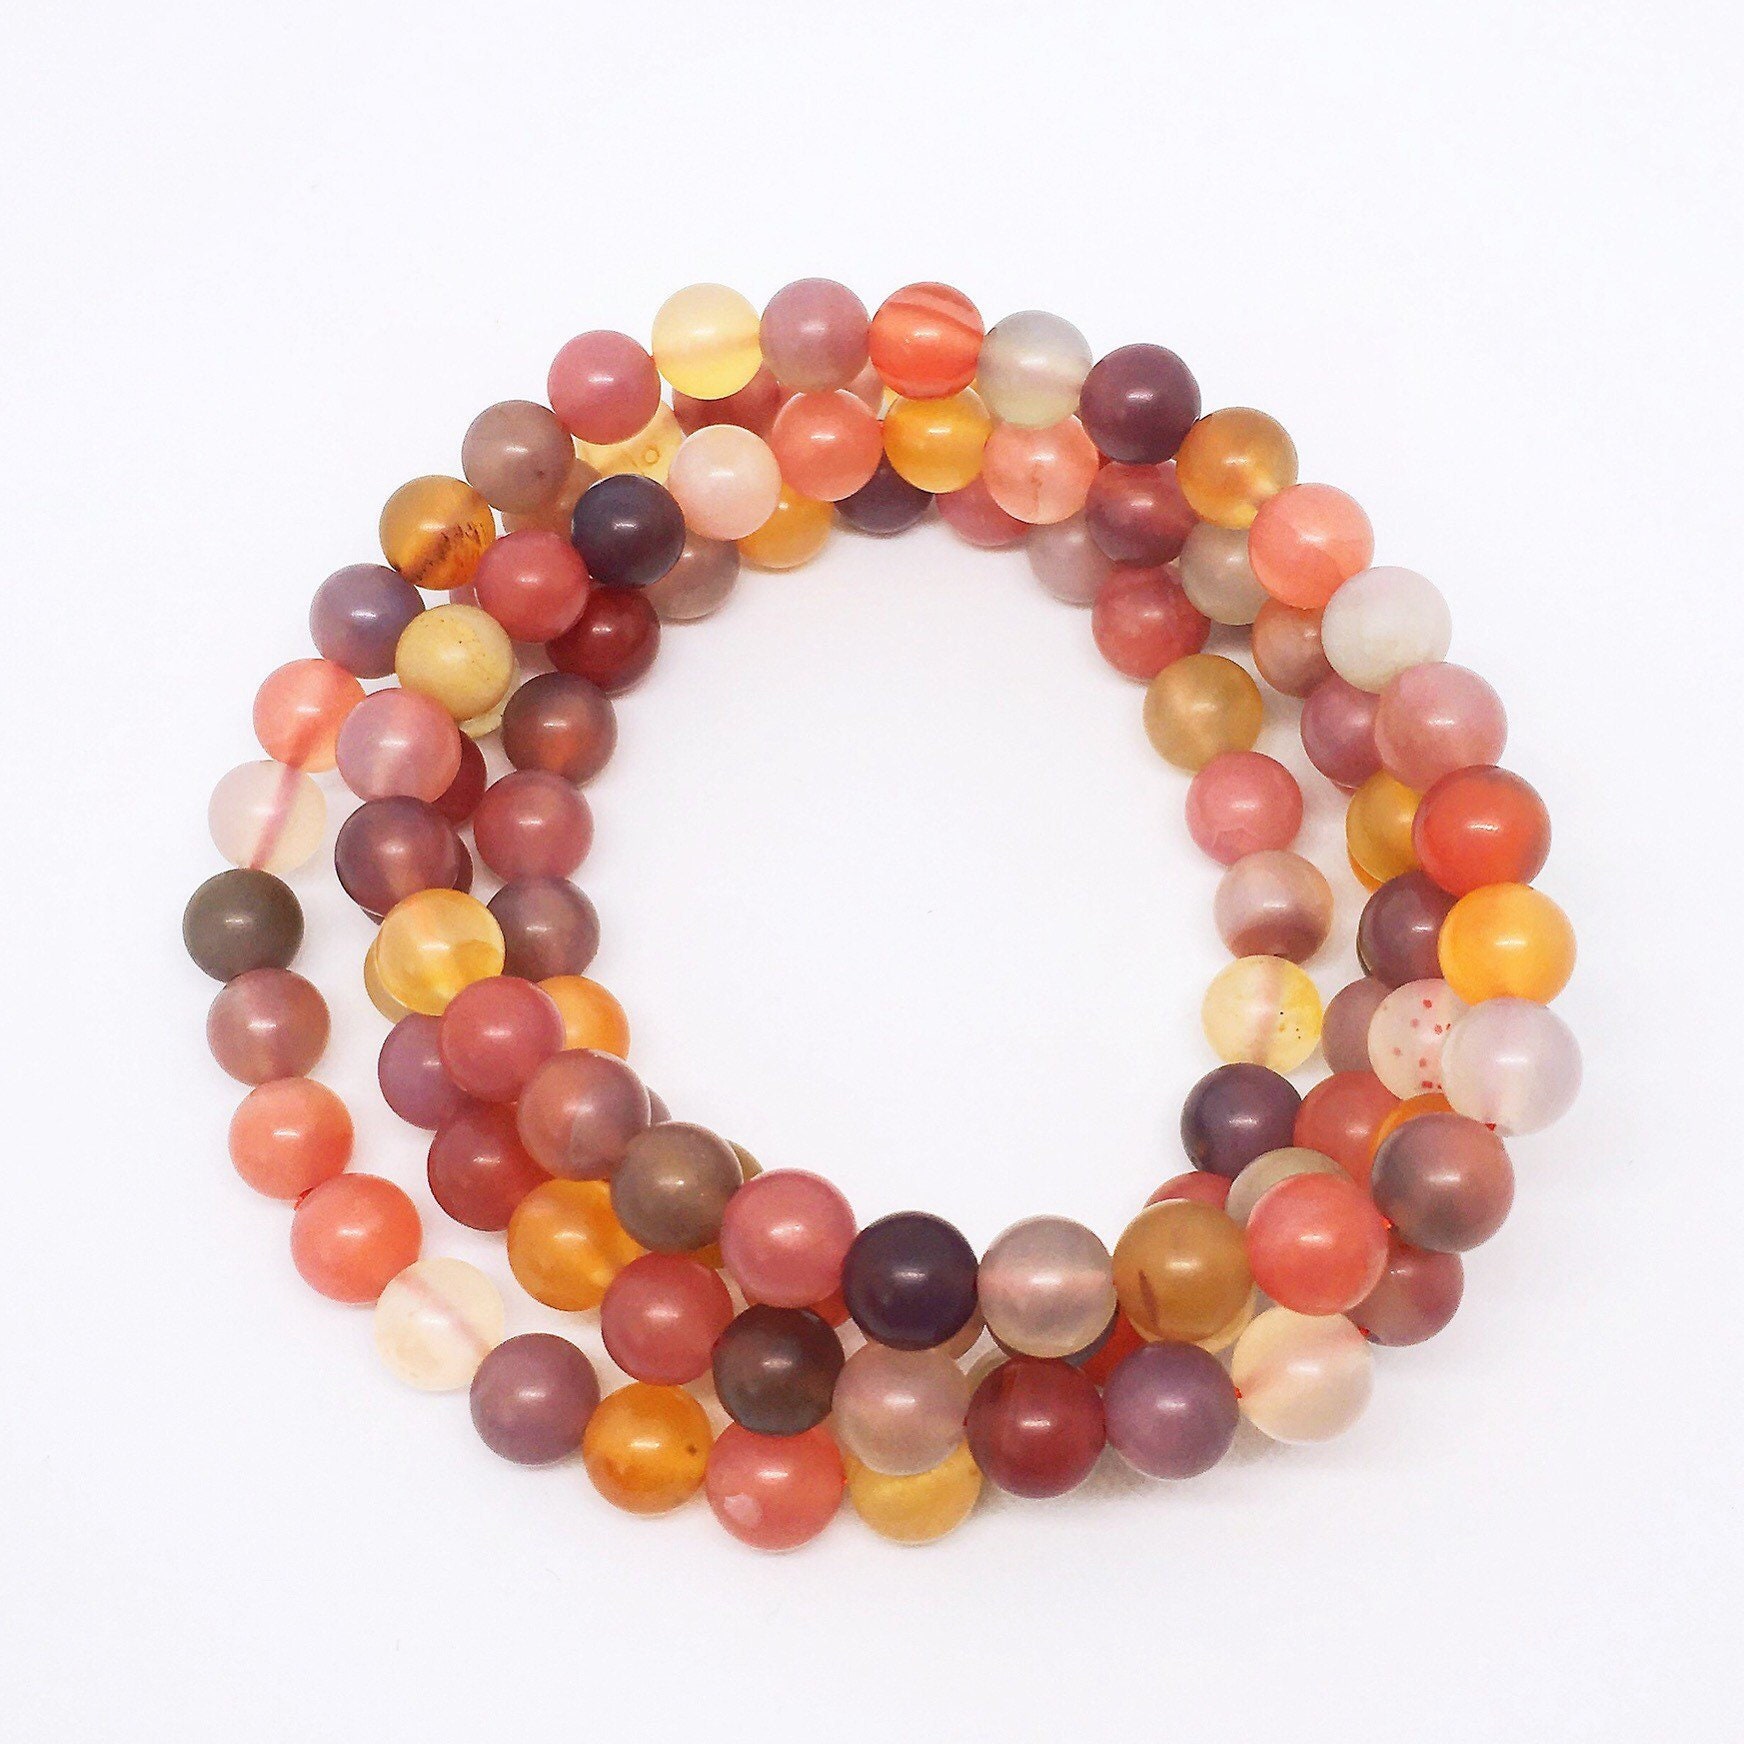 Handmade Multi-Color Agate Beaded Stretchy Bracelet 7" XMAS Gift Free Shipping 